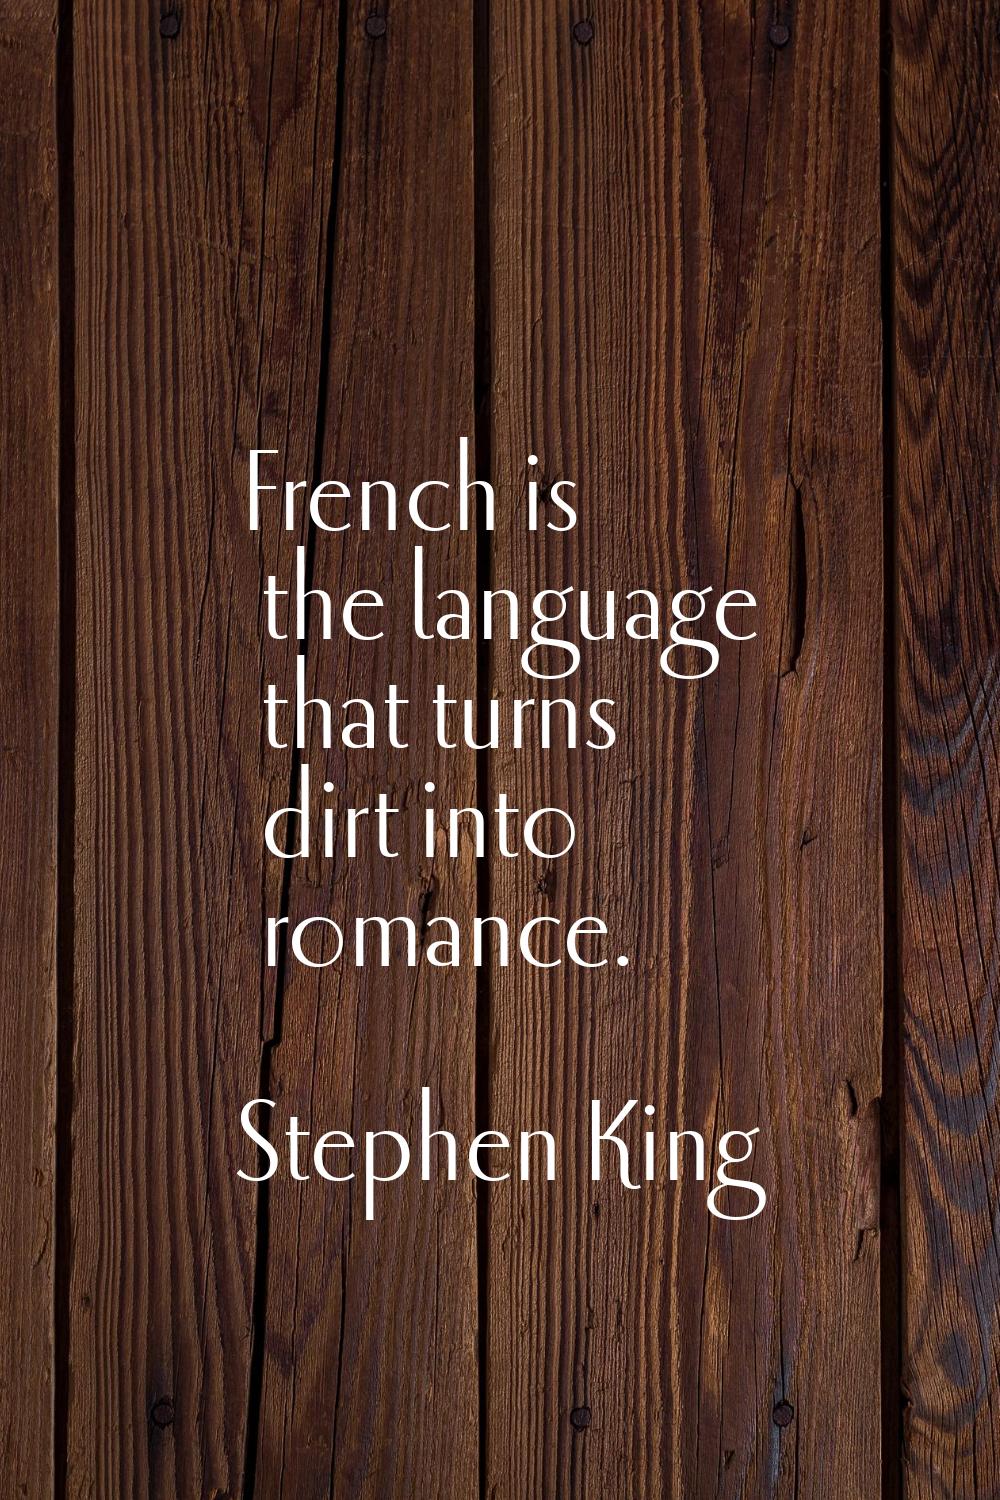 French is the language that turns dirt into romance.